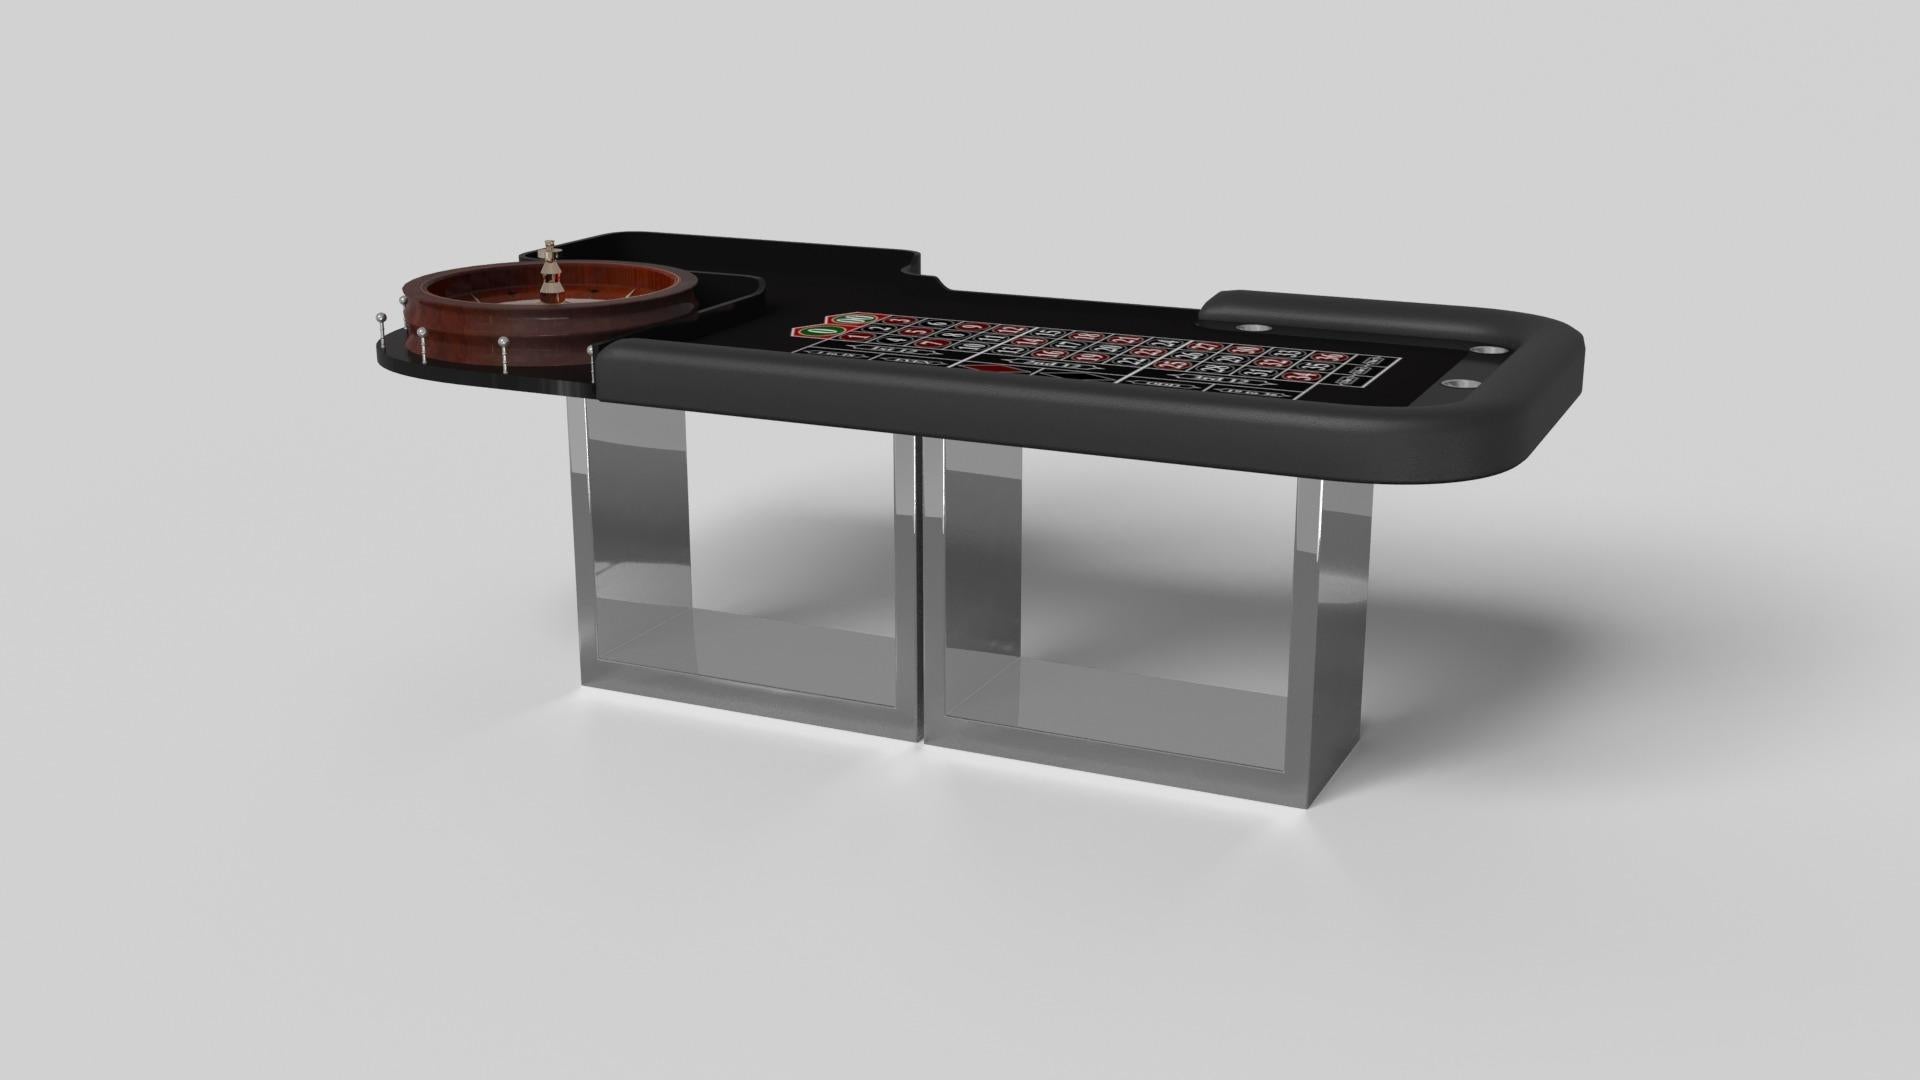 Supported by two rectangular open pedestals as the base, the Ambrosia roulette table is modern and minimalistic with its combination of simple, geometric forms. Viewed from the front, the use of negative space is evident; viewed from the side, the